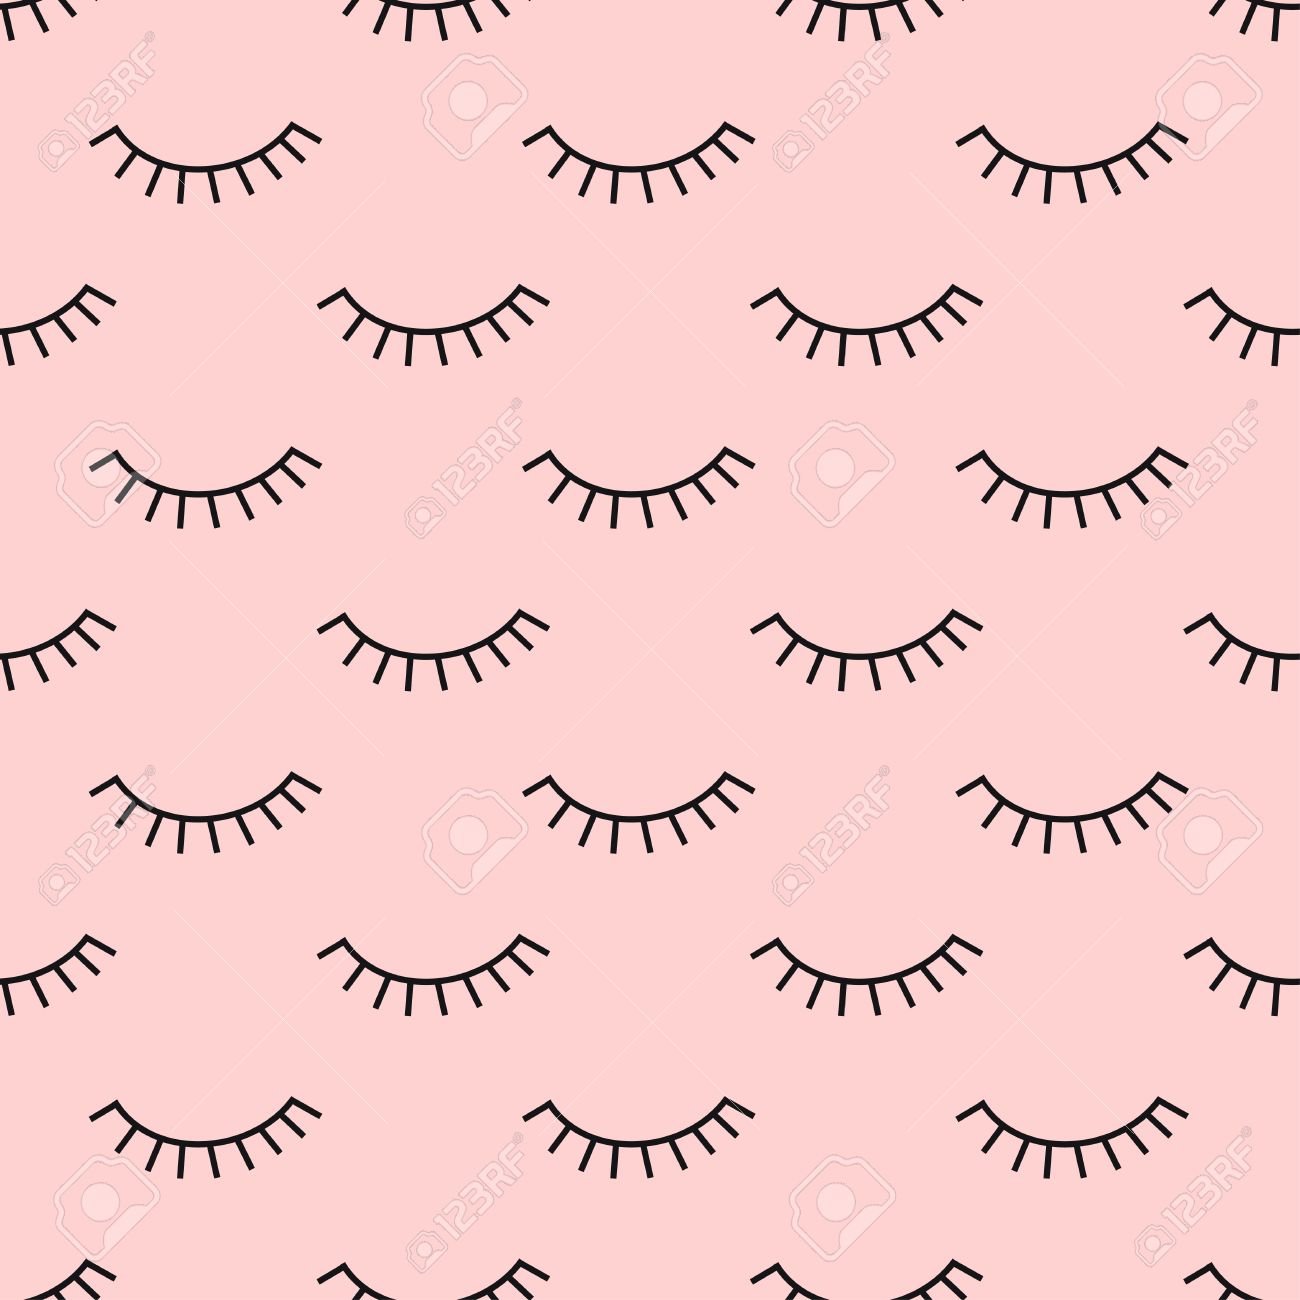 Abstract Pattern With Closed Eyes On Pink Background Cute